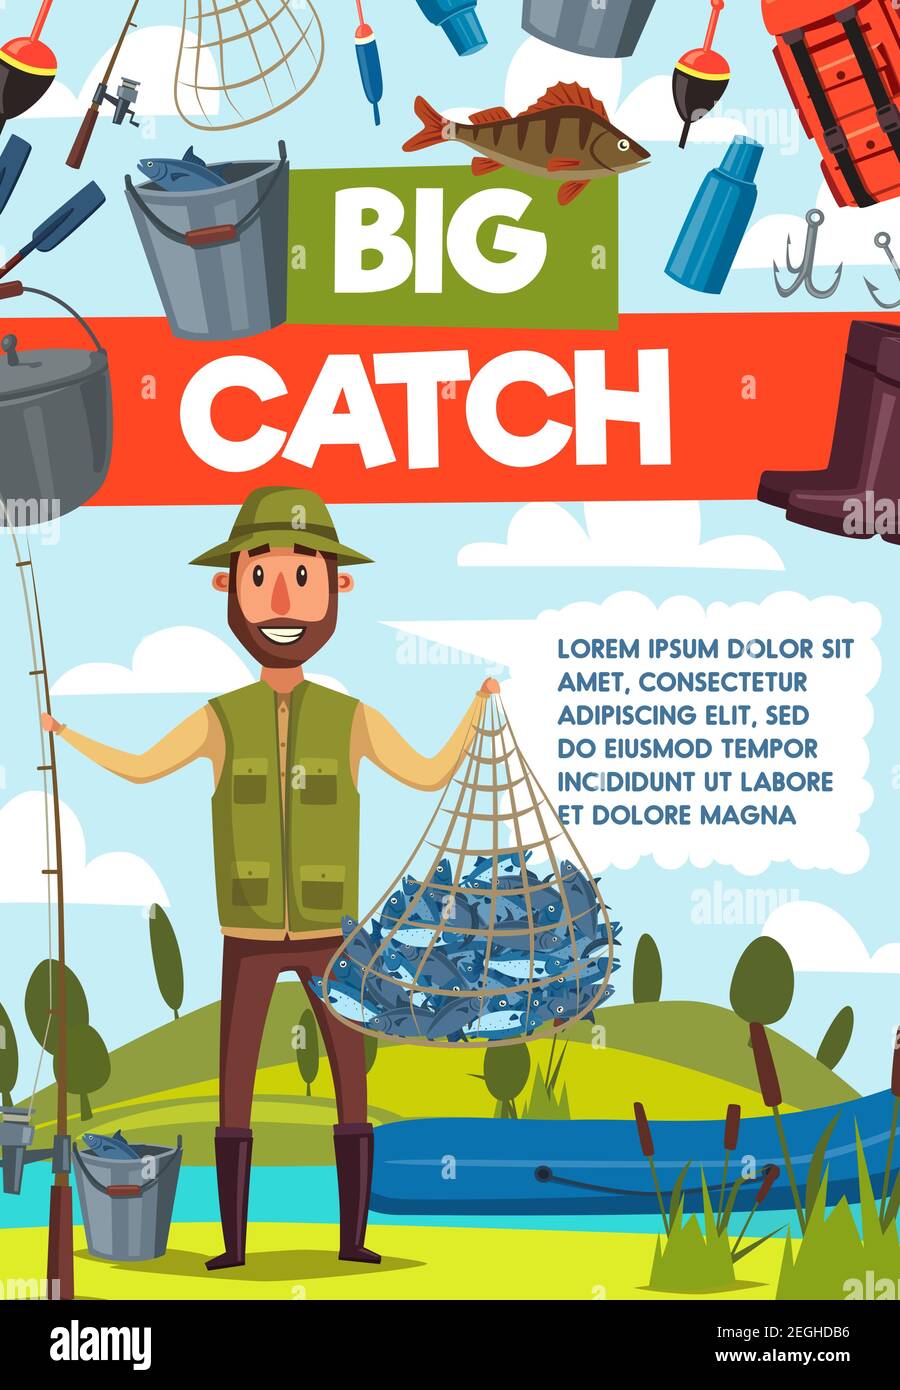 Big catch fish banner for fishing sport, outdoor activity design. Fisherman  with rod, fish net and boat on river or lake bank poster, adorned by hook  Stock Vector Image & Art 